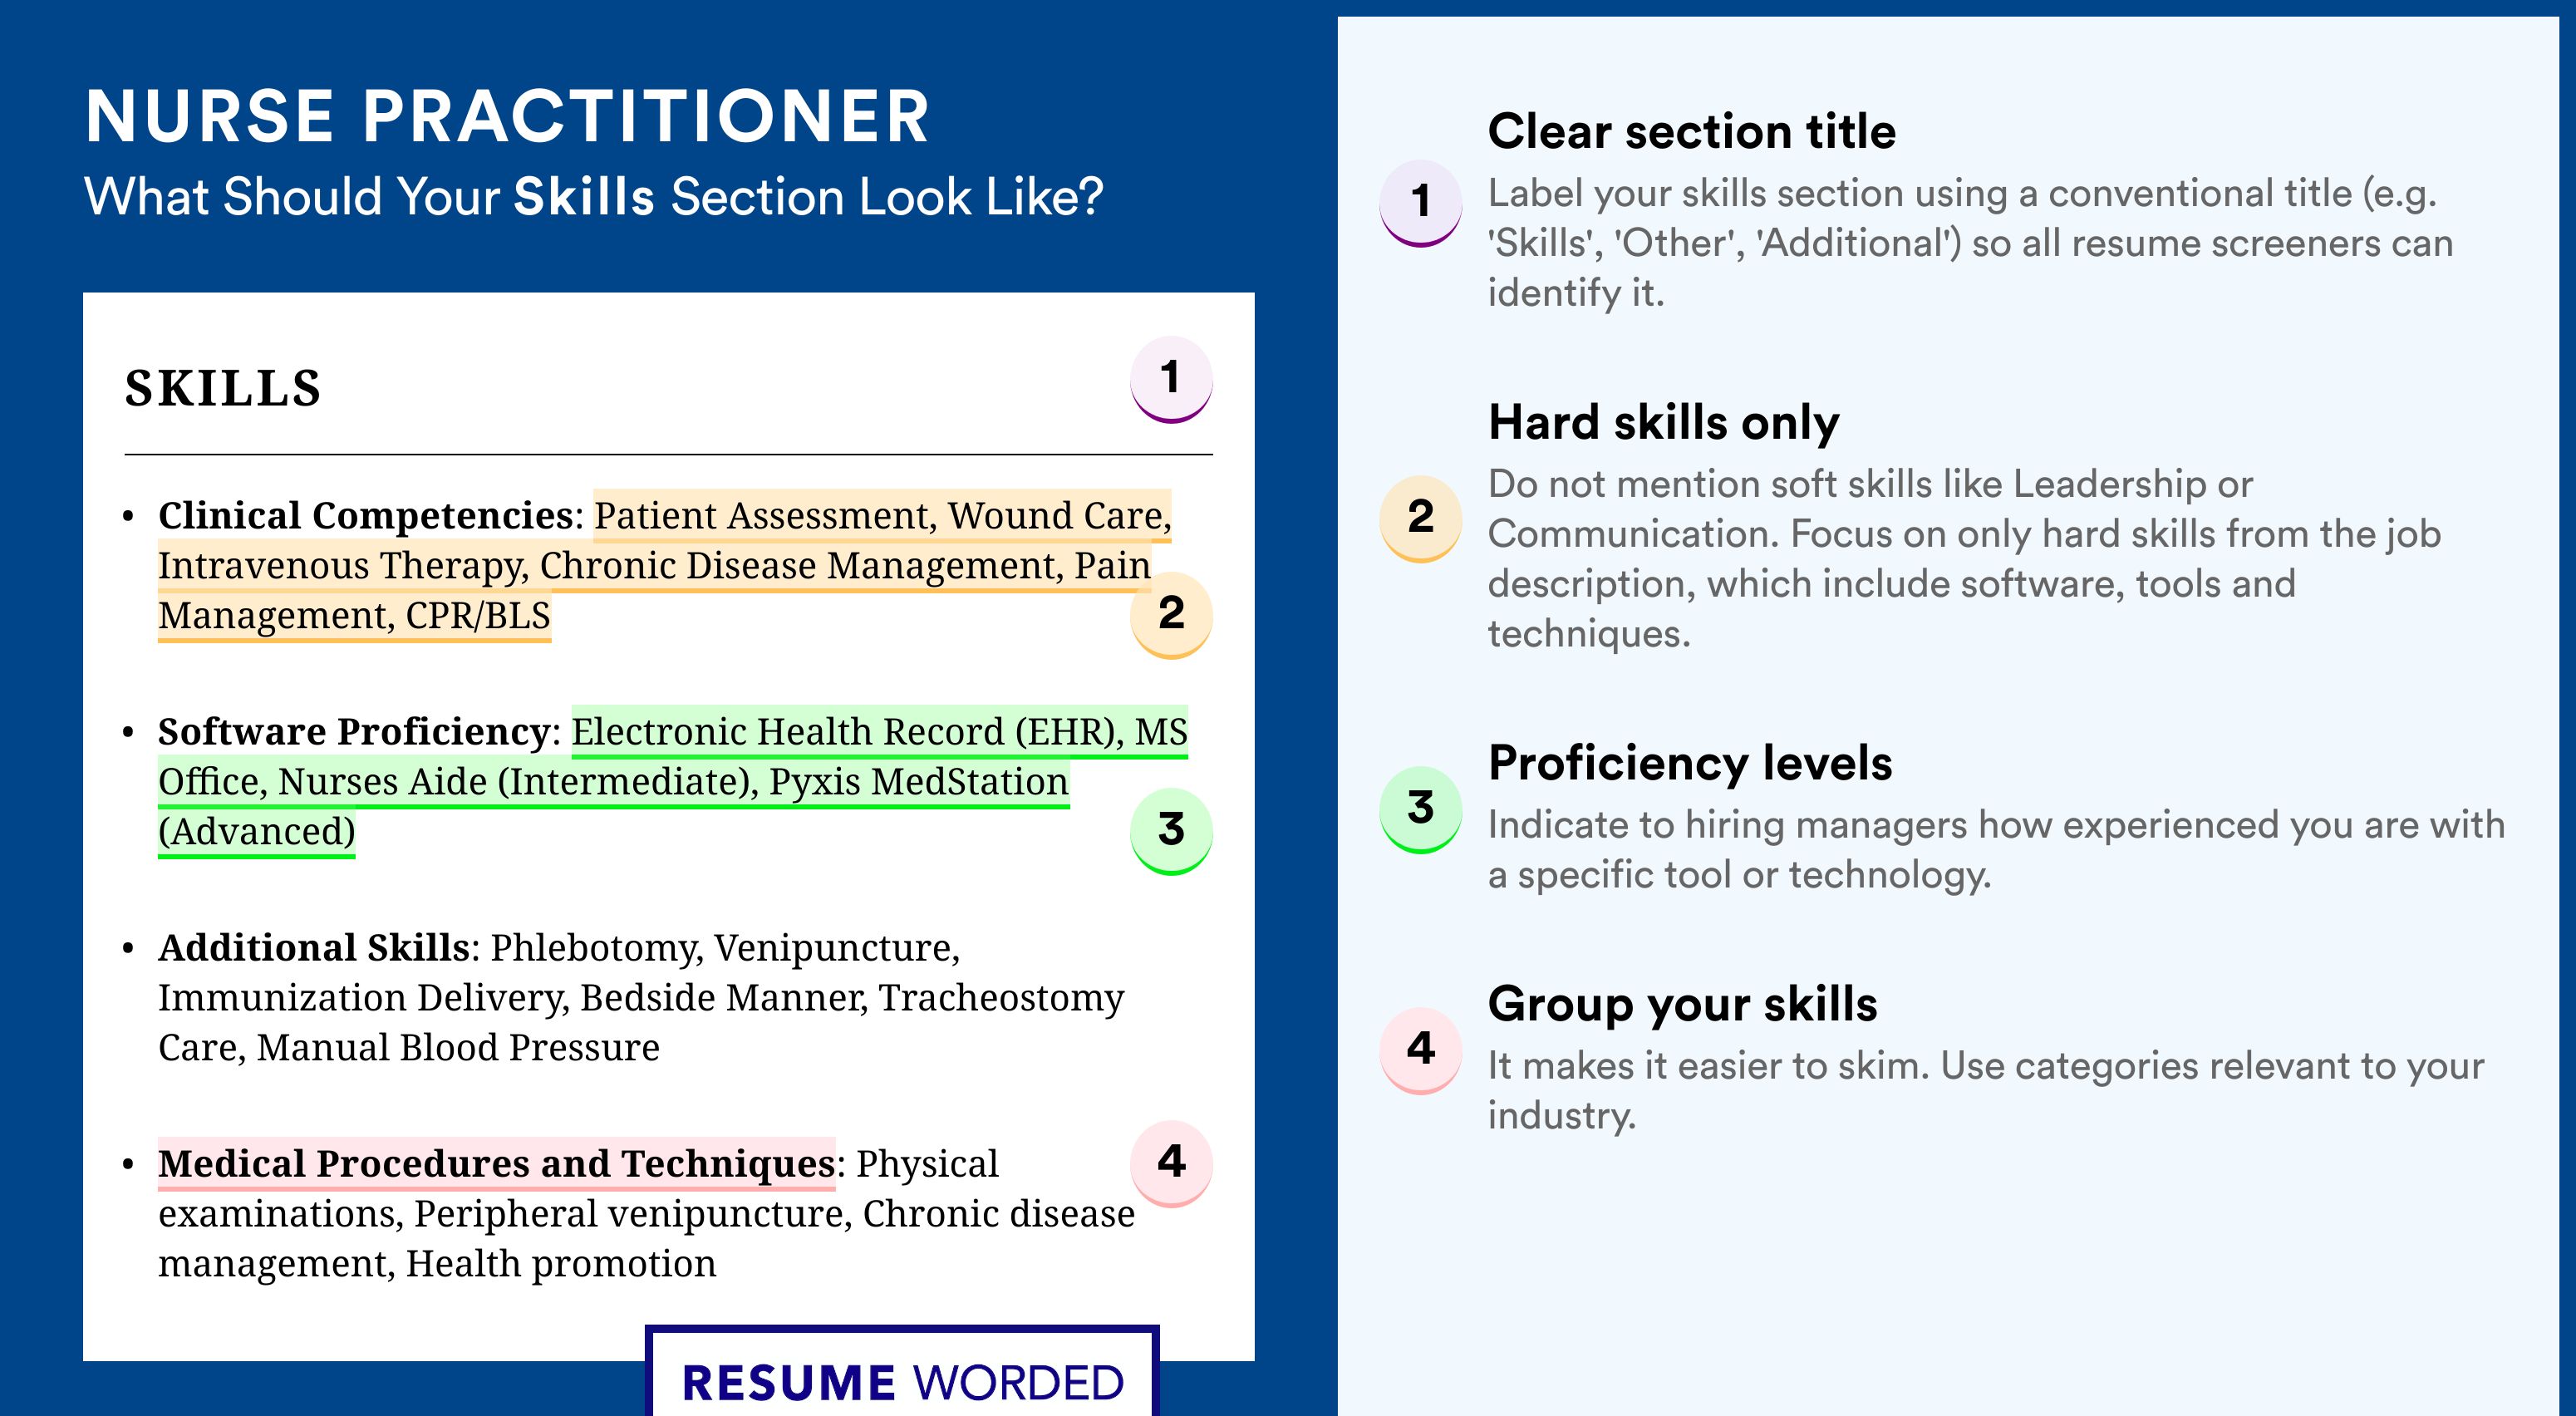 How To Write Your Skills Section - Nurse Practitioner Roles